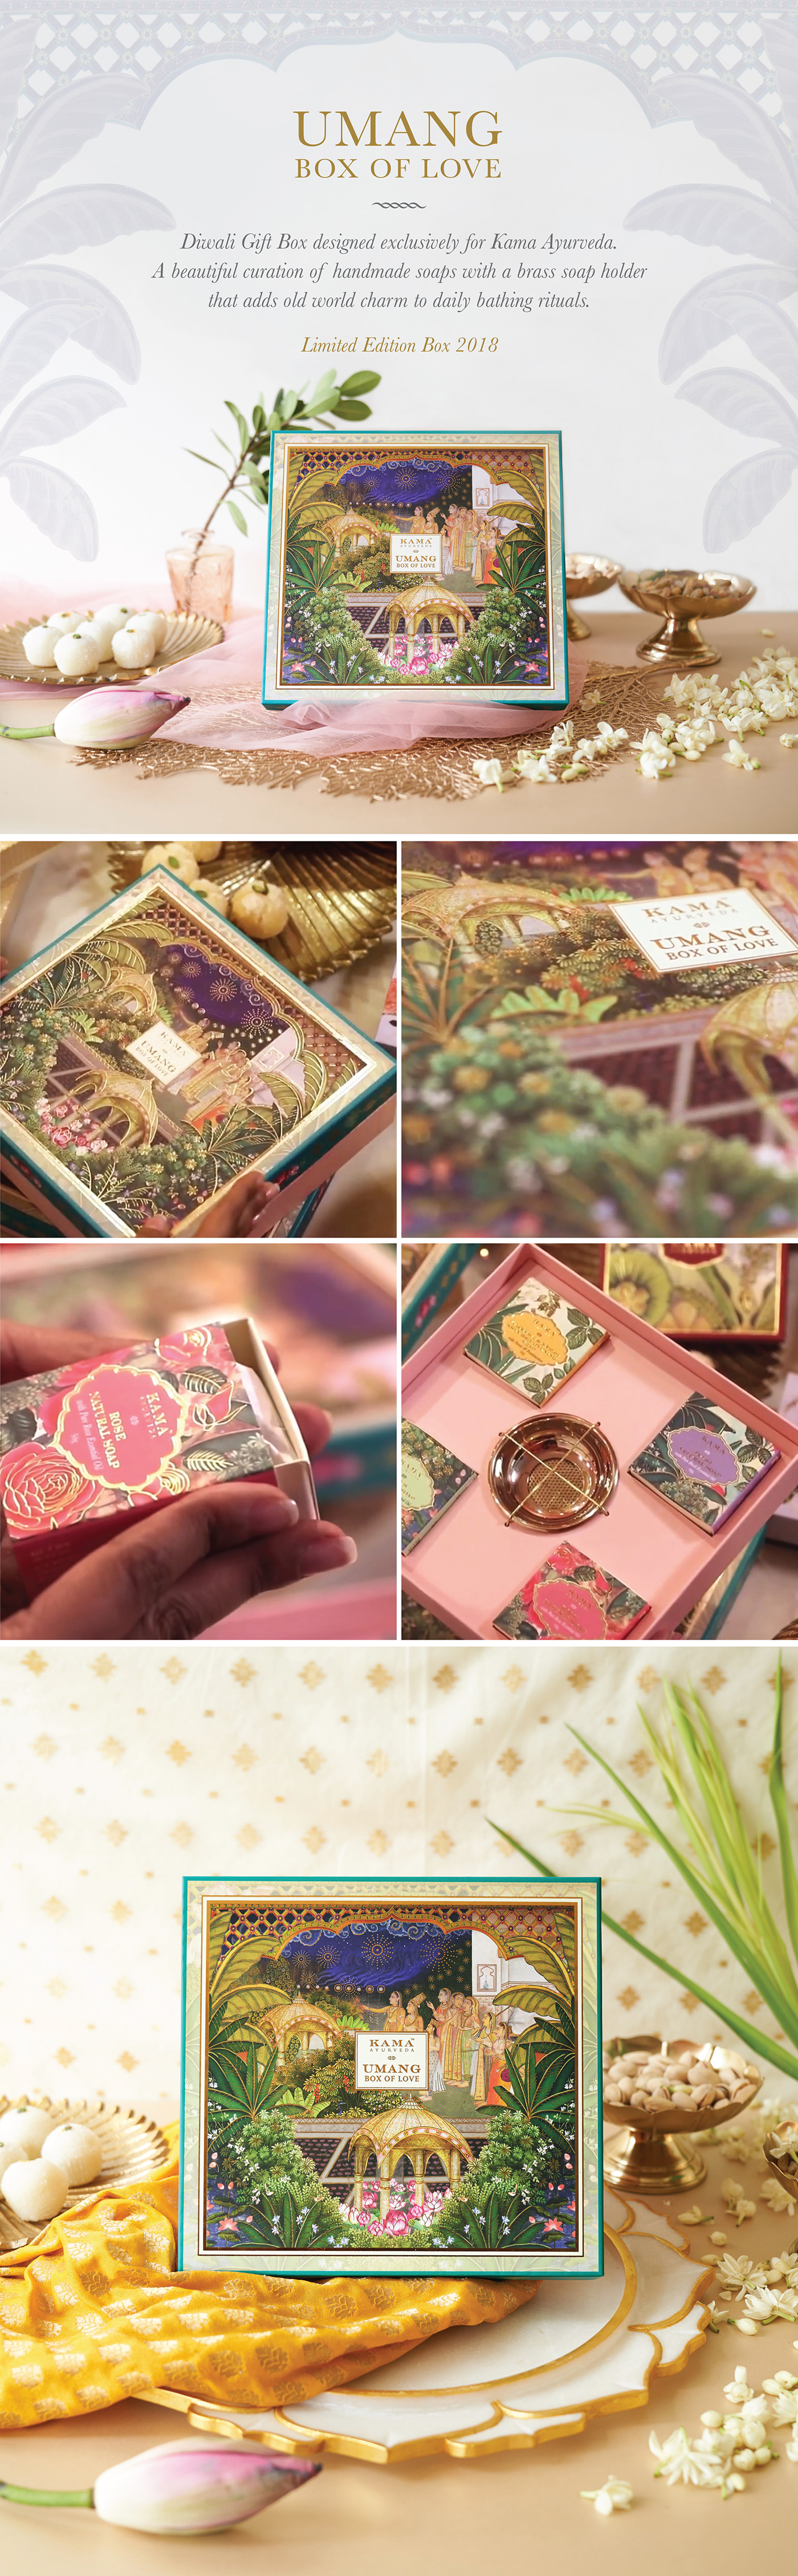 Packaging miniature painting mughal luxury soaps Indian festival box design ILLUSTRATION  India gift box design